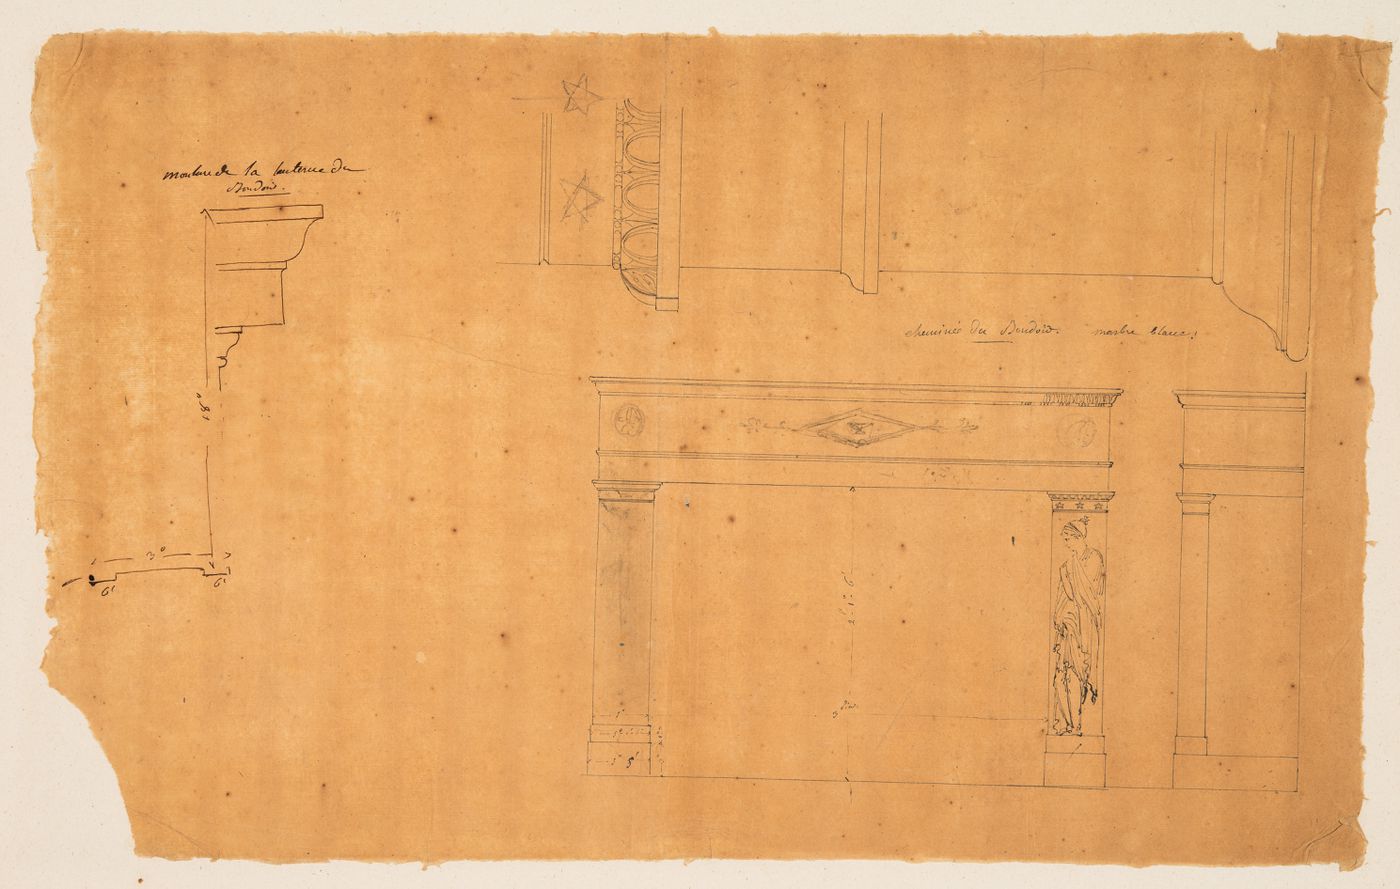 Project for renovations for a house for M. le Dhuy: Elevations and details for a mantel for the boudoir